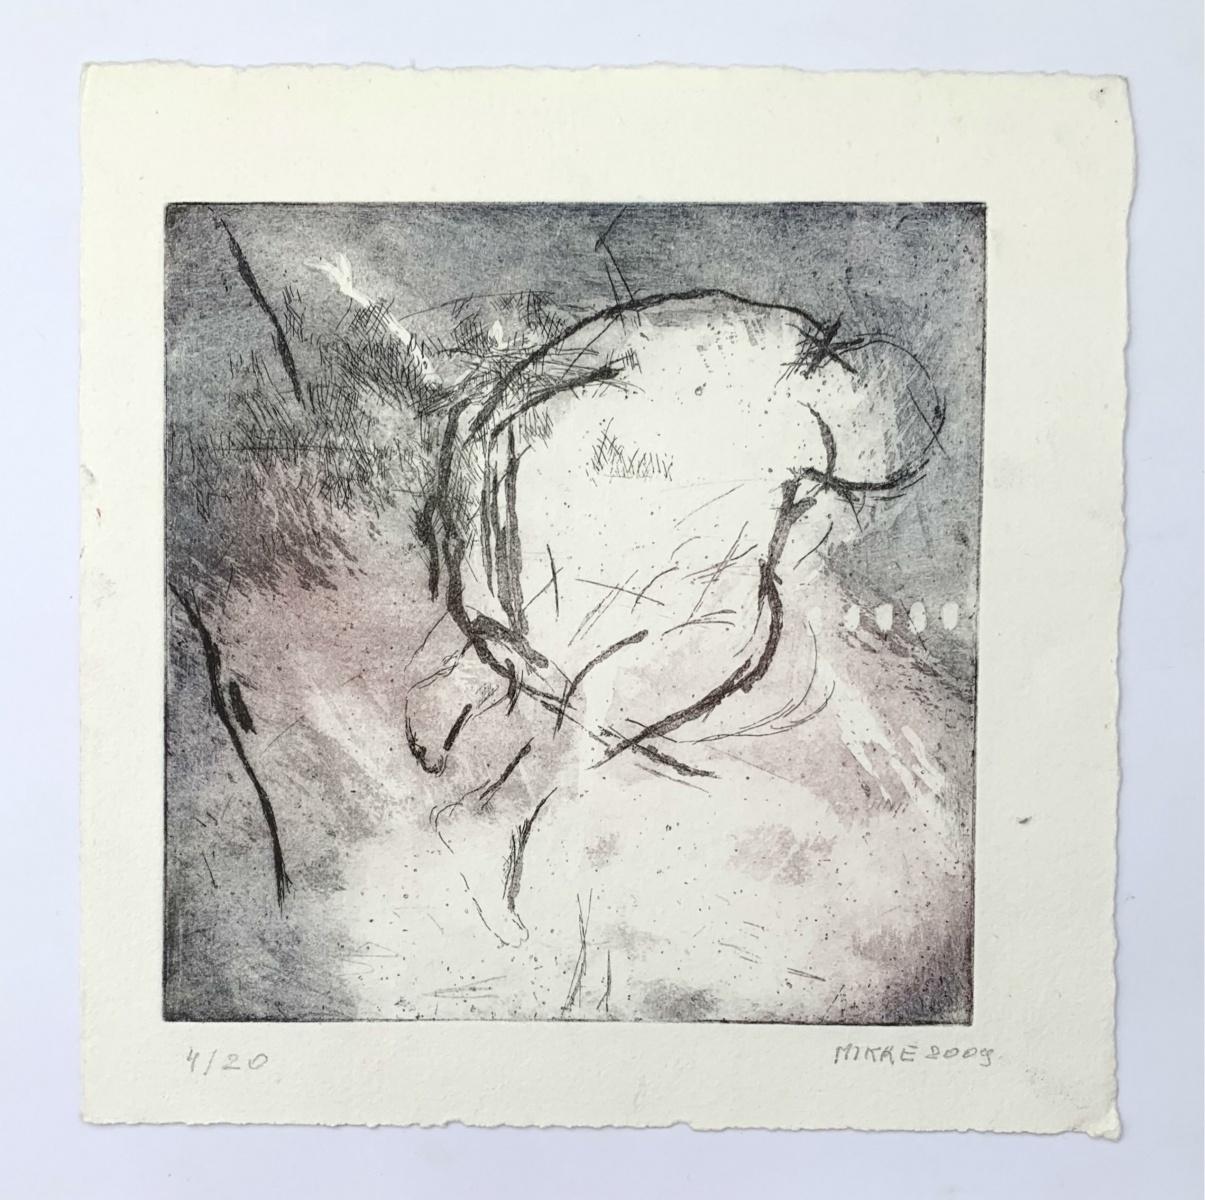 Nude - Figurative etching print, Abstract, Minimalist - Print by Anna Mikke